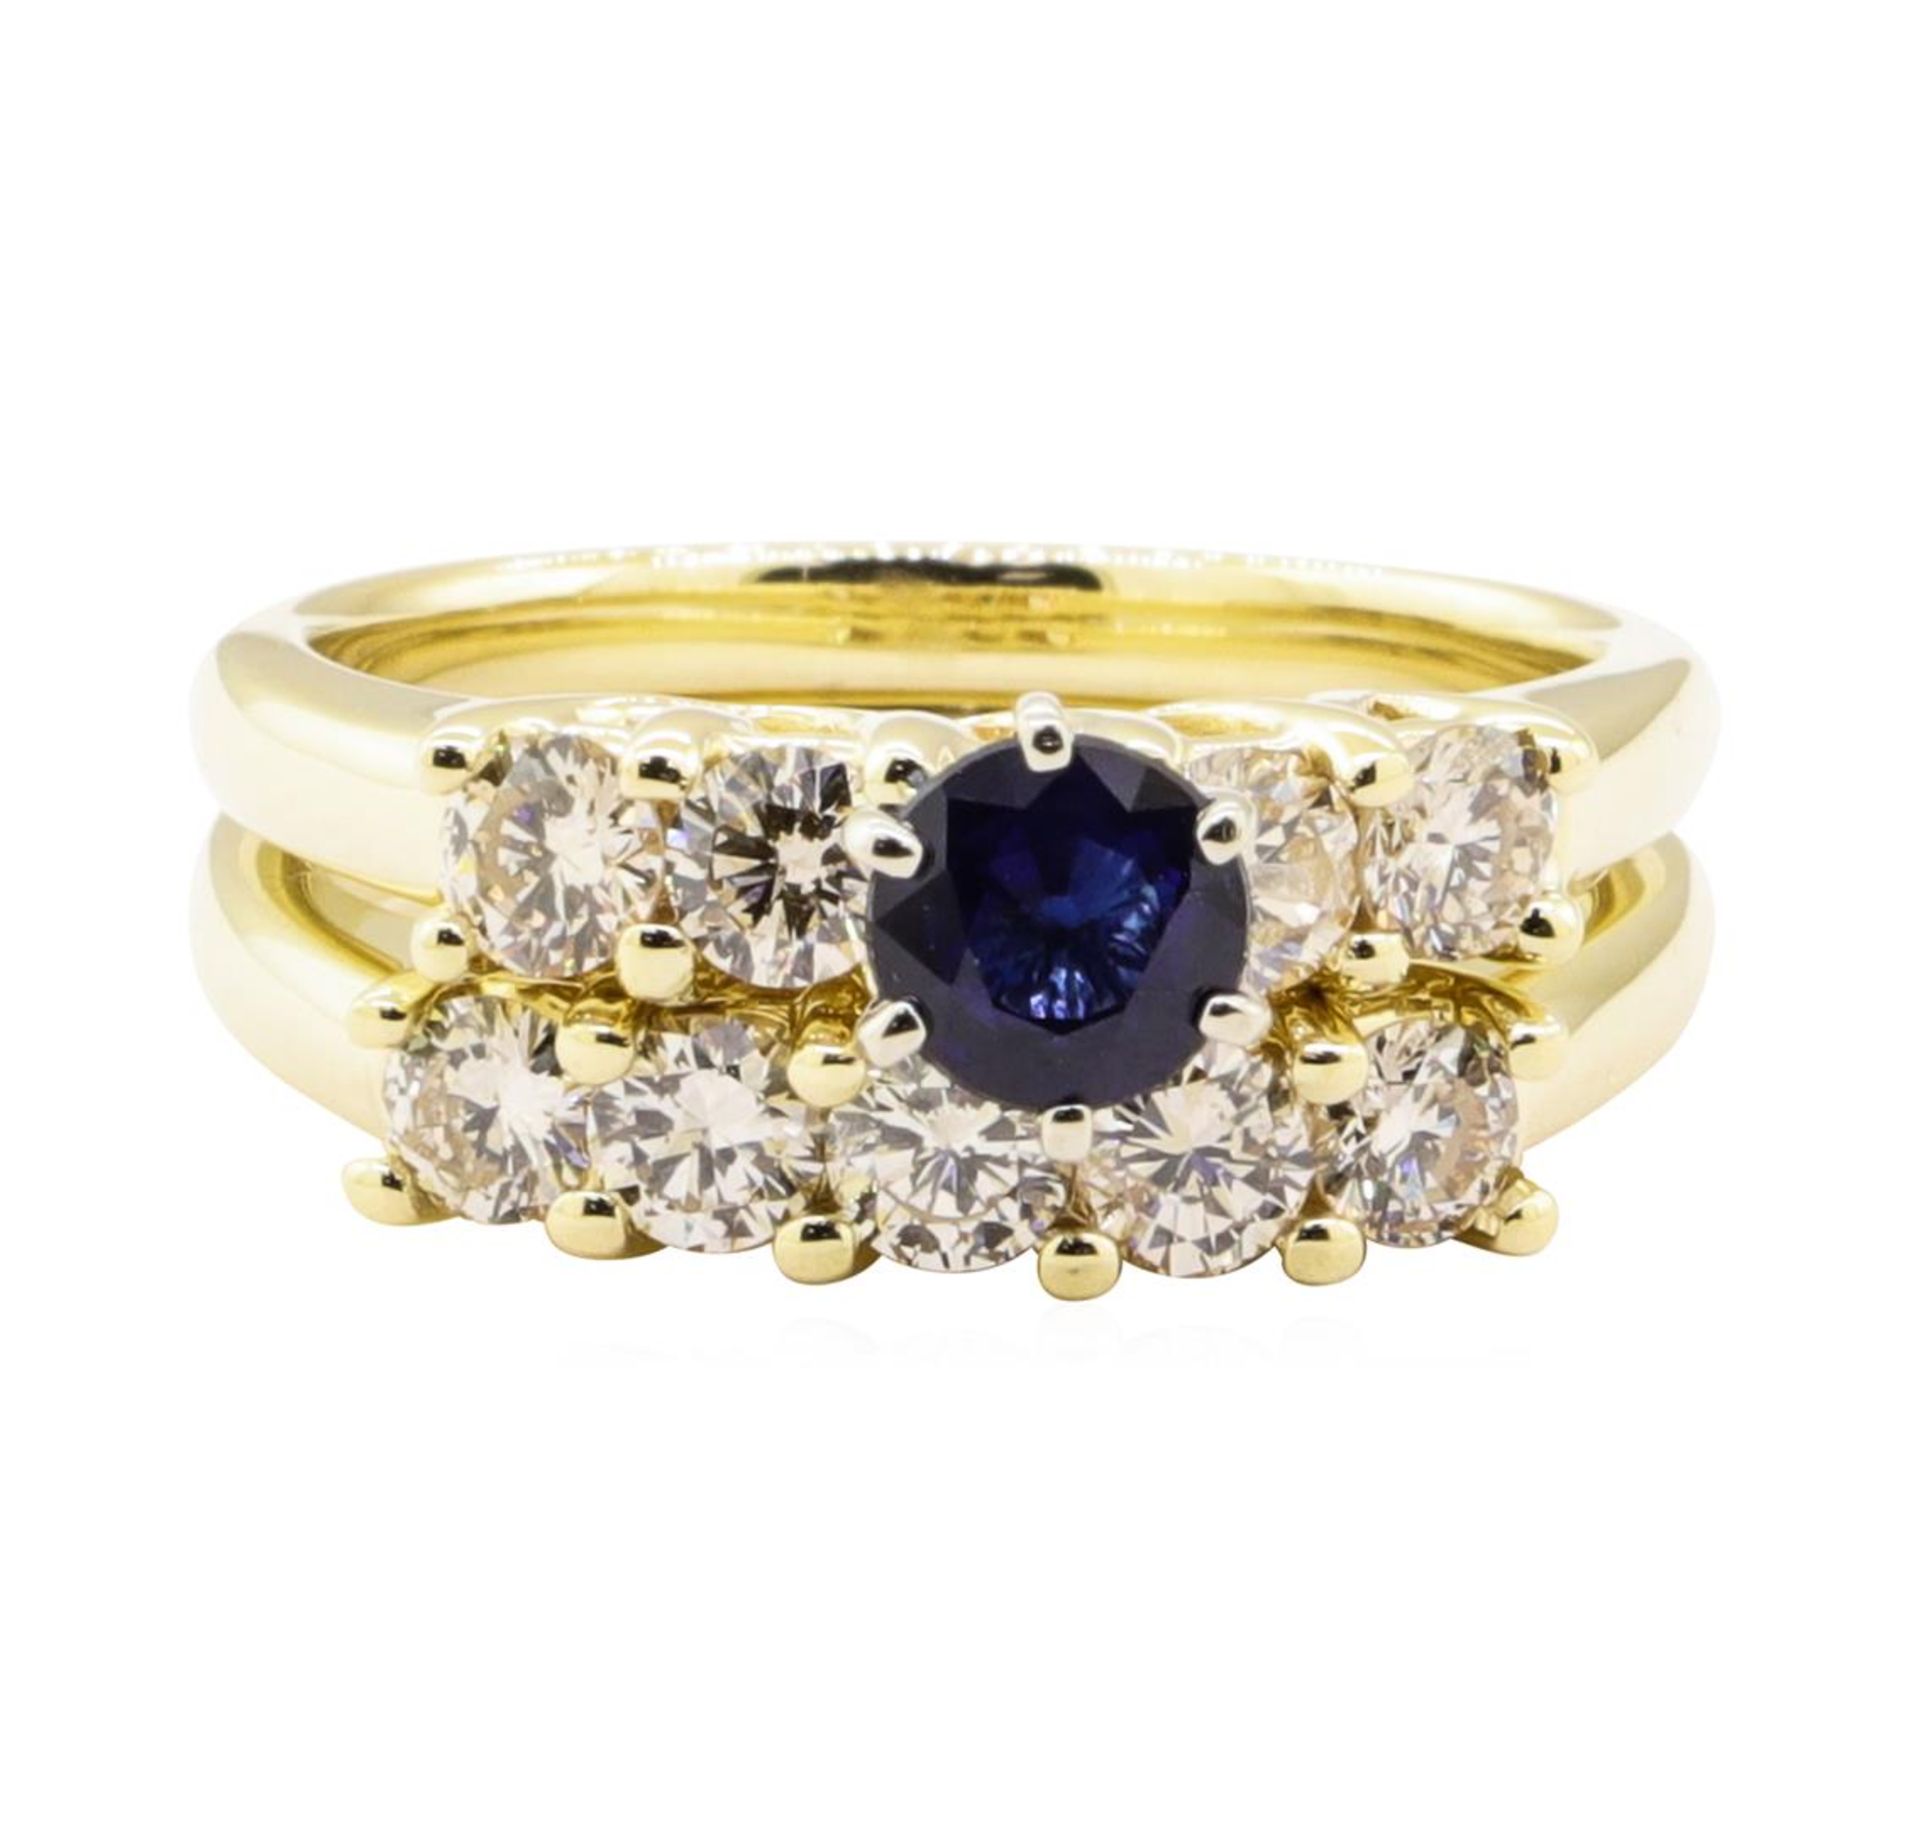 1.70 ctw Blue Sapphire And Diamond Ring And Band - 14KT Yellow Gold - Image 2 of 4